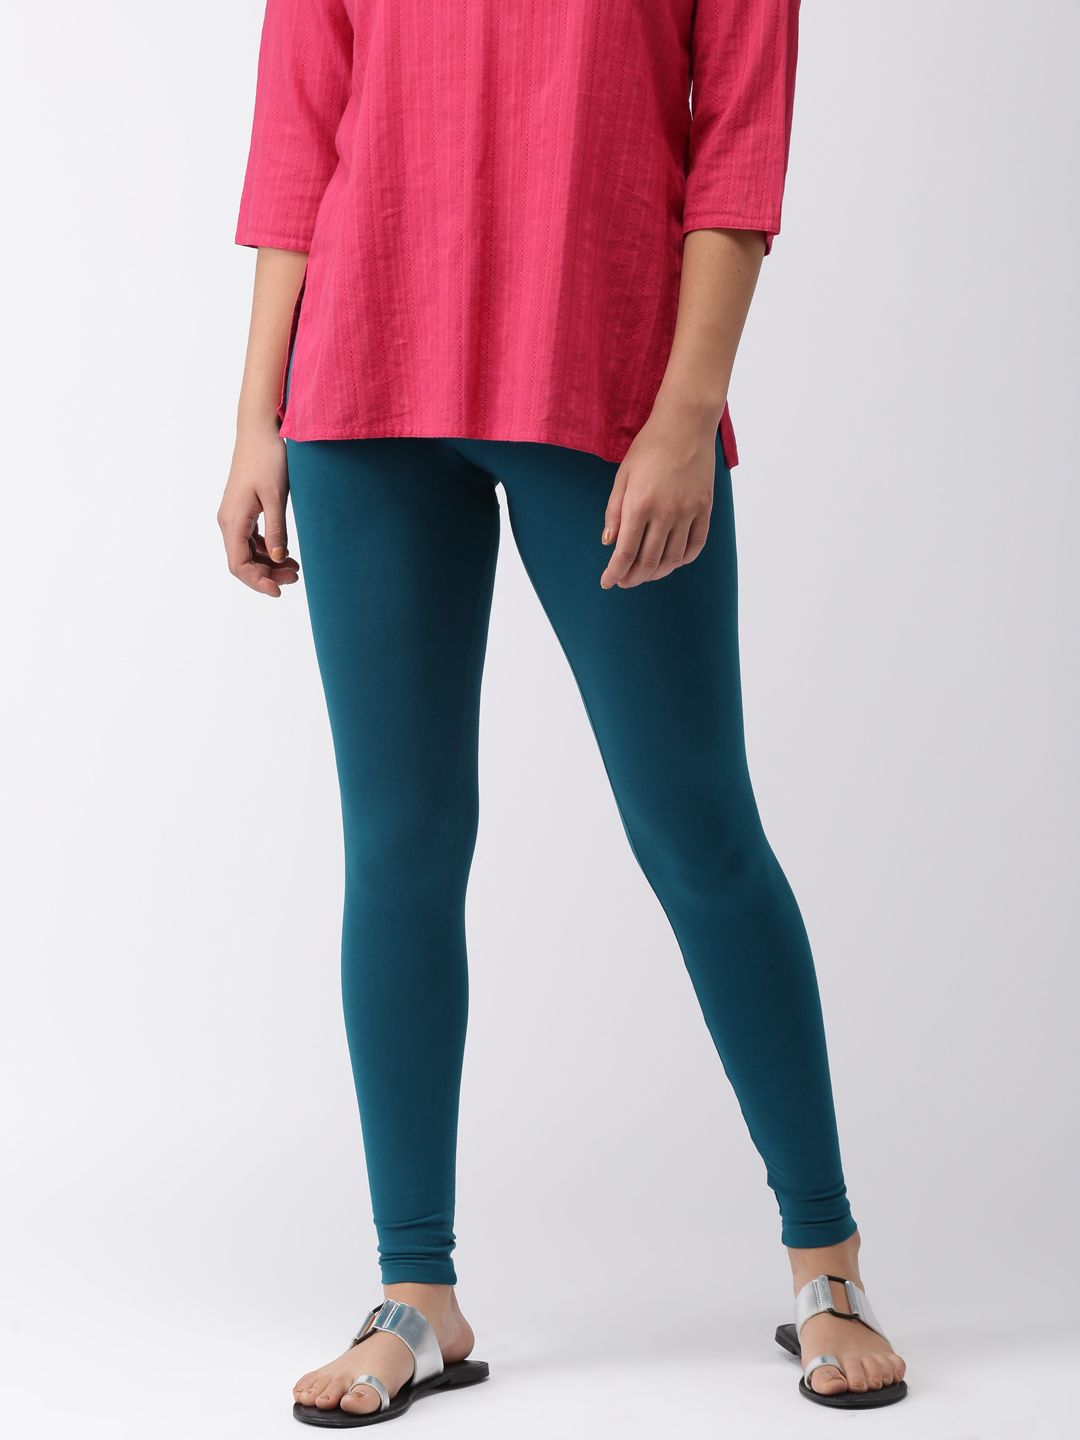 Go Colors Women Teal Blue Solid Ankle Length Leggings Price in India